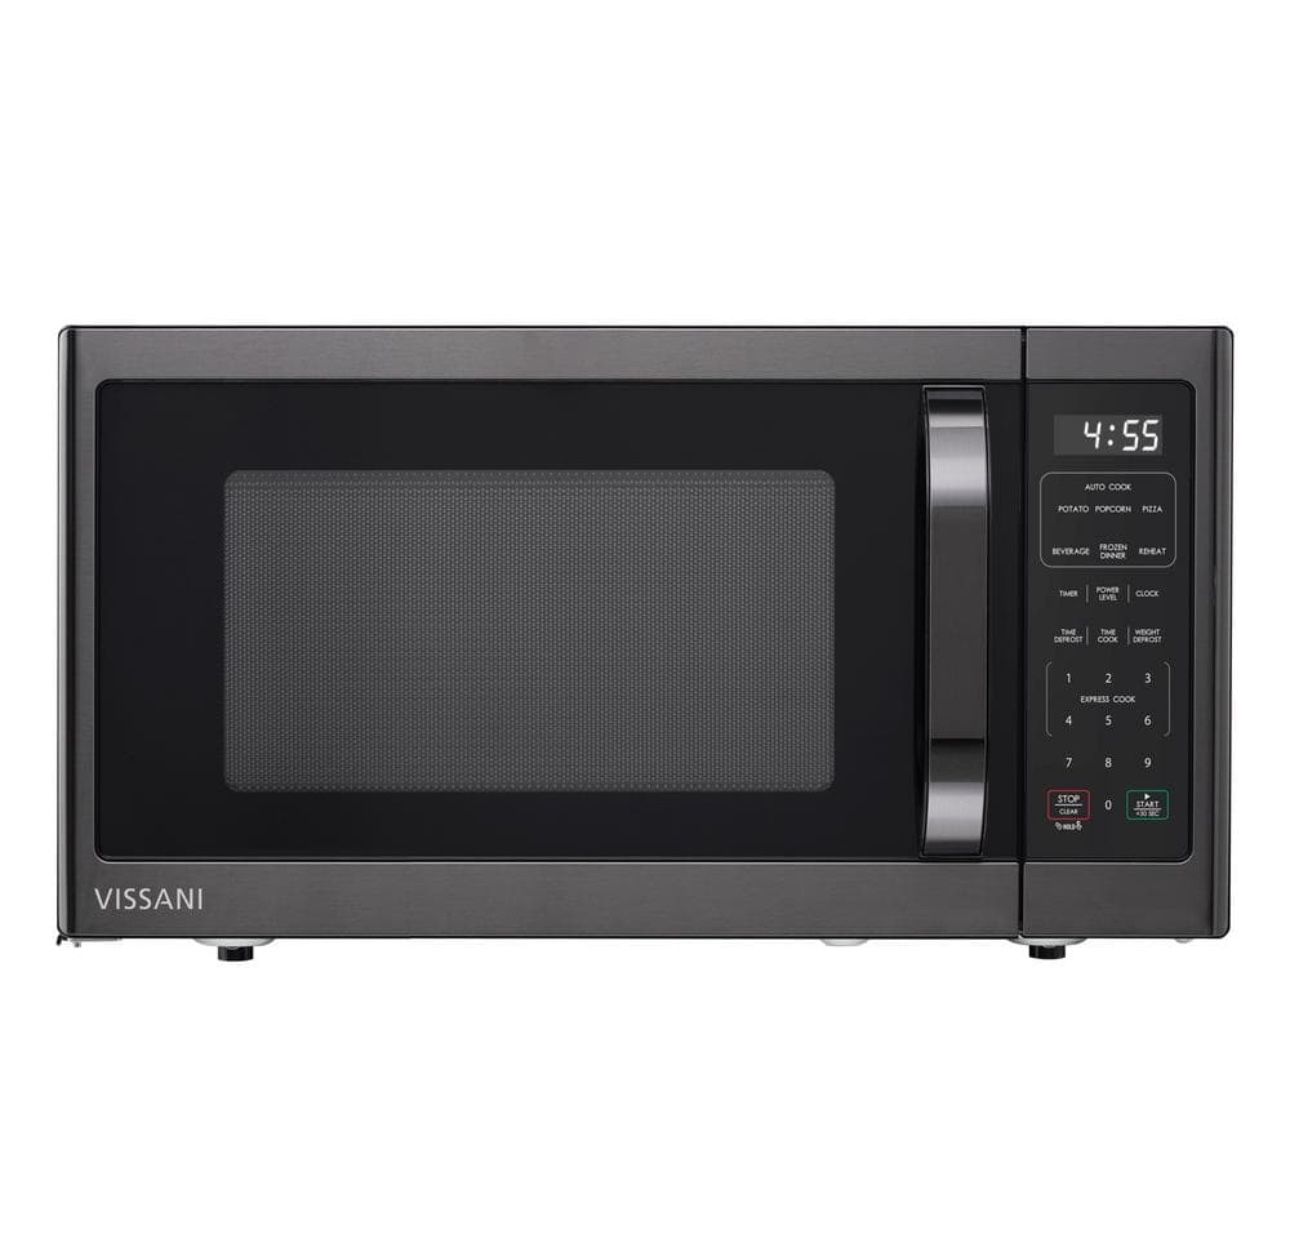 Vissani 1.6 cu. ft. Countertop with Sensor Cook Microwave in Stainless Steel